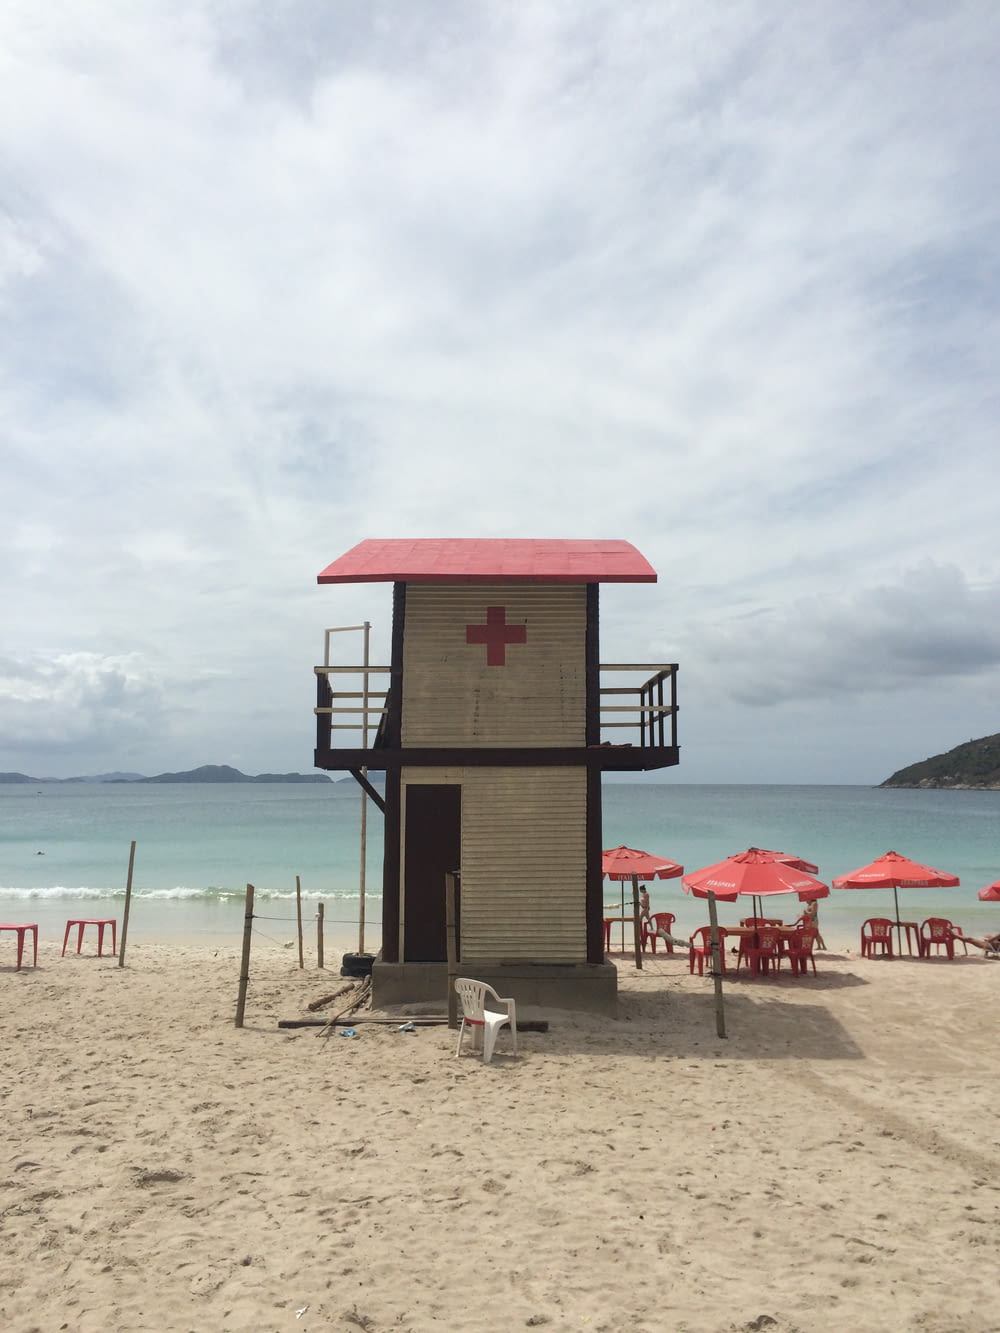 white and red lifeguard house near red beach chairs under white skies